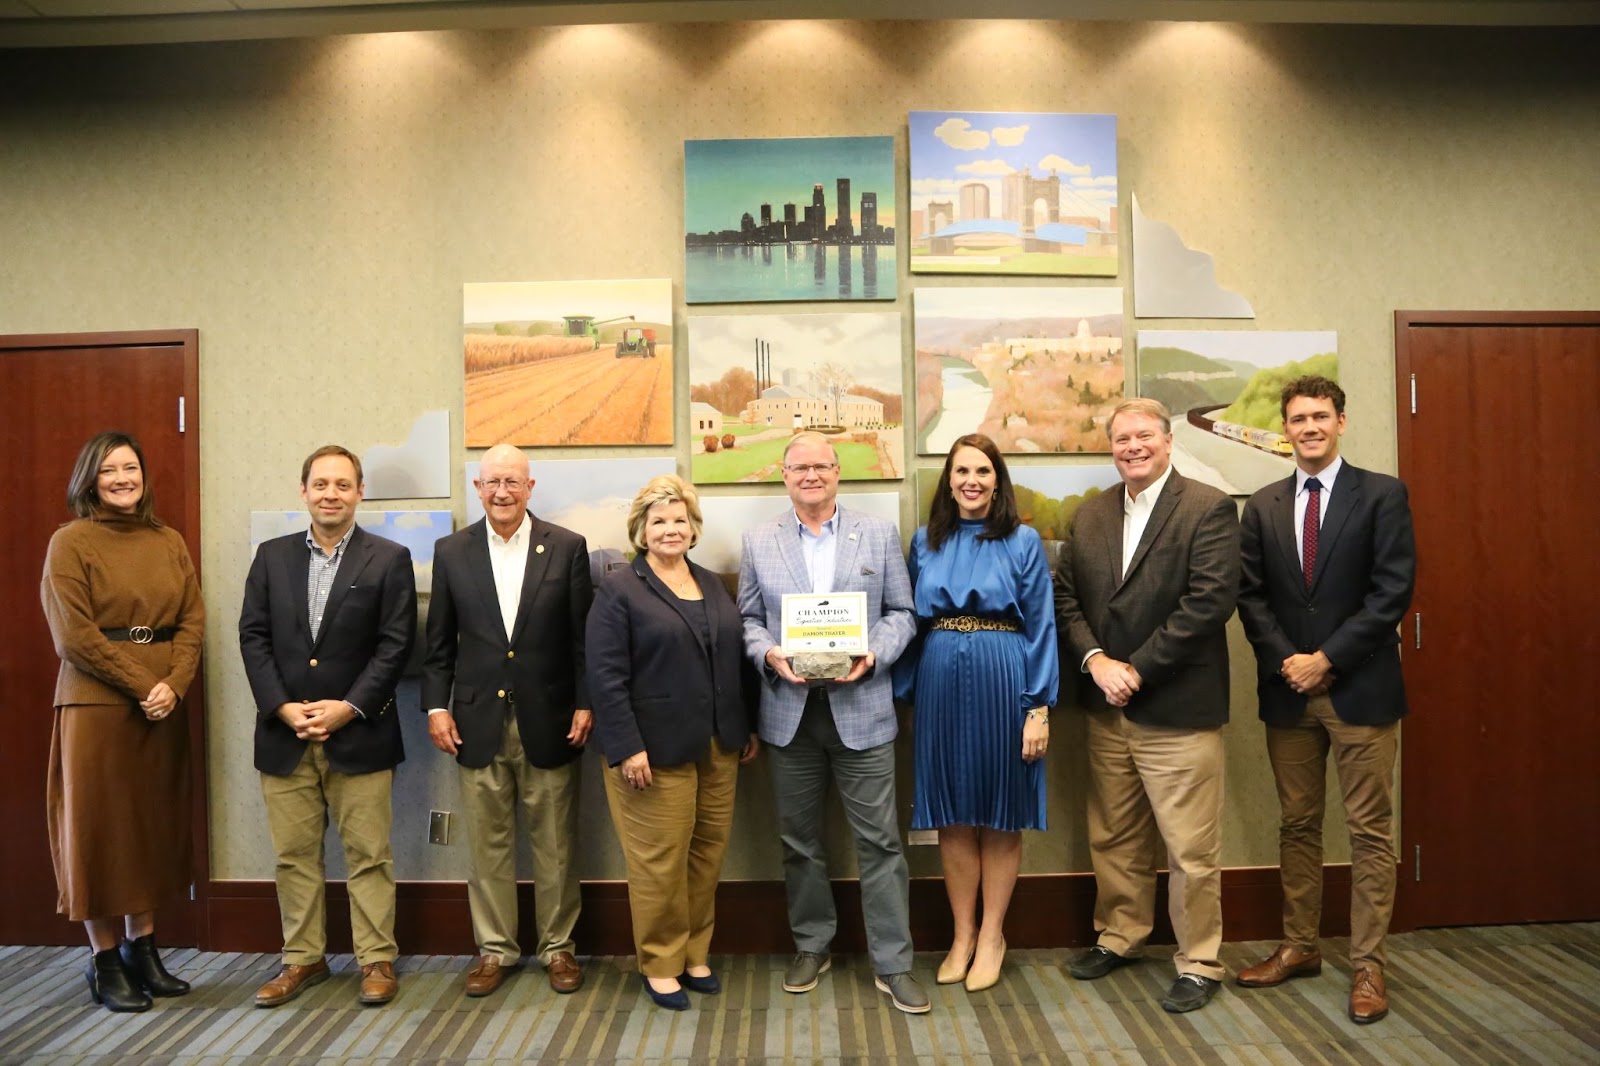 SENATOR DAMON THAYER IS OFFICIALLY PRESENTED CHAMPION FOR SIGNATURE INDUSTRIES AWARD